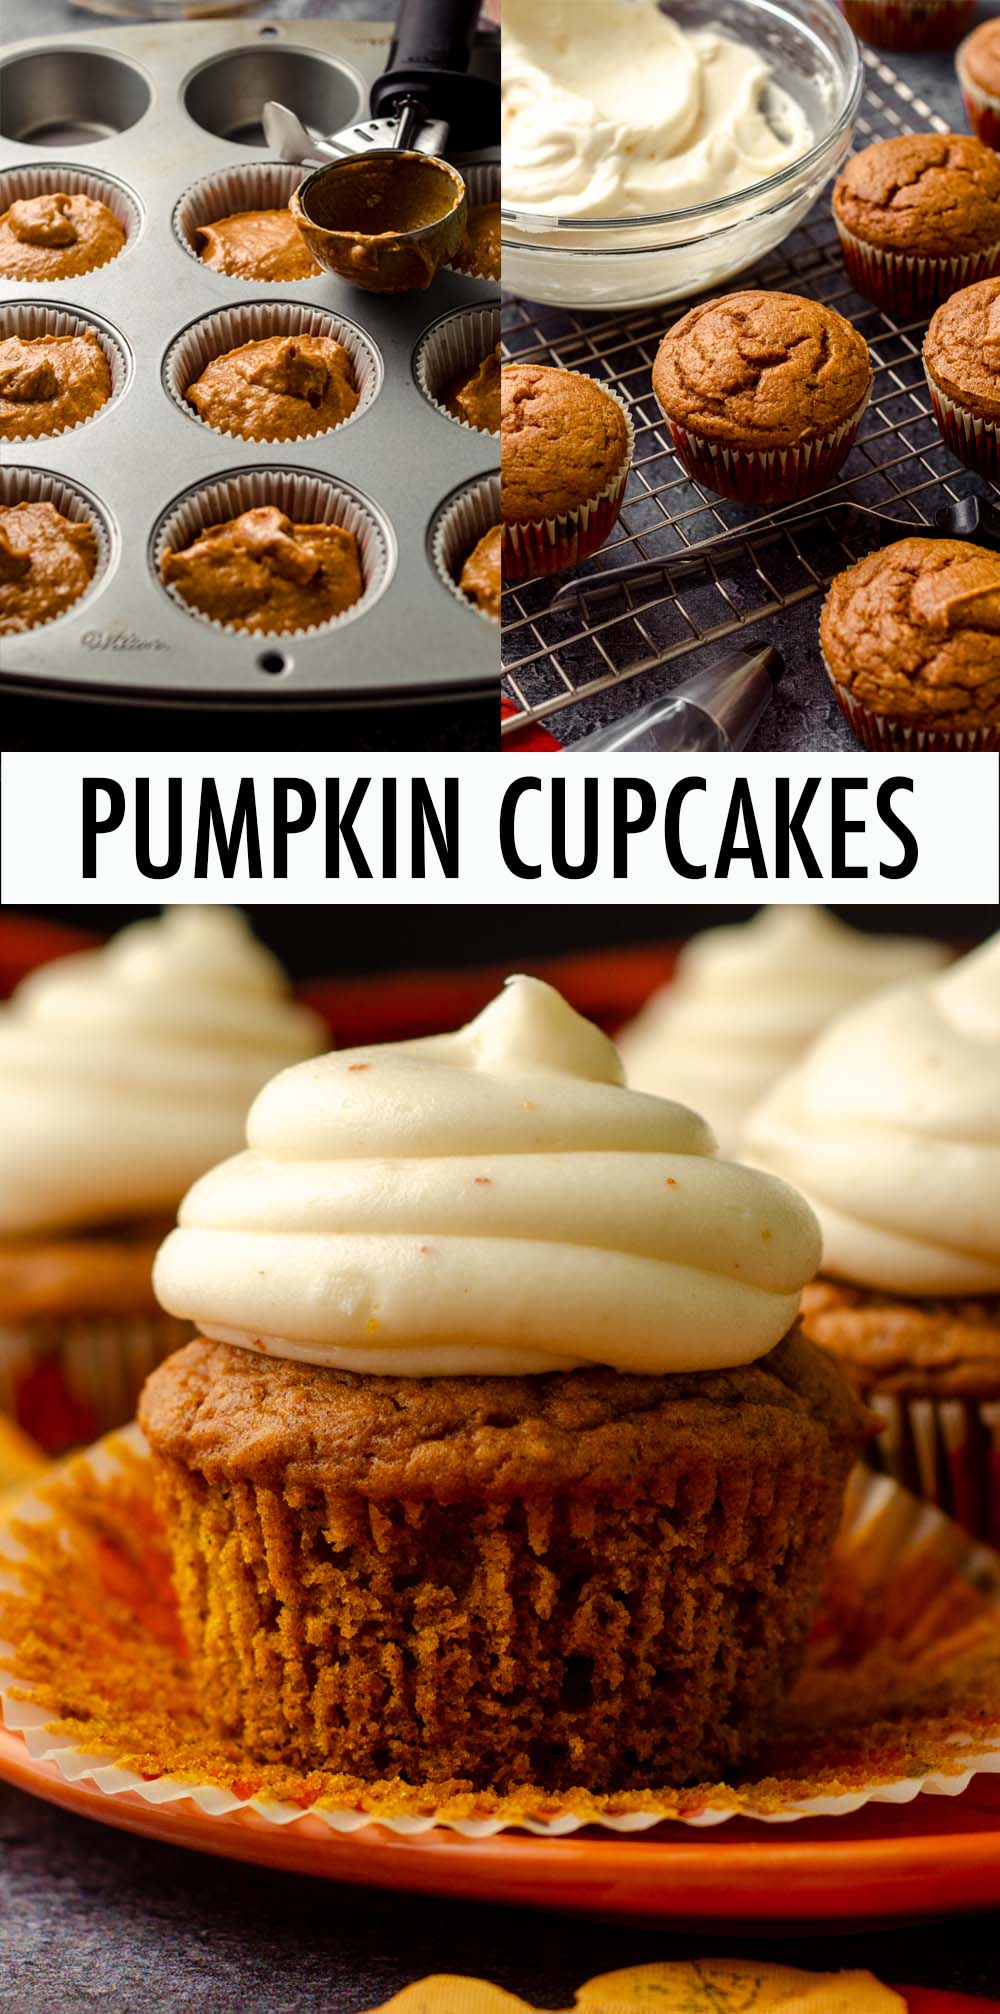 Moist and tender pumpkin cupcakes made with real pumpkin and topped with a delectable brown butter cream cheese frosting. via @frshaprilflours